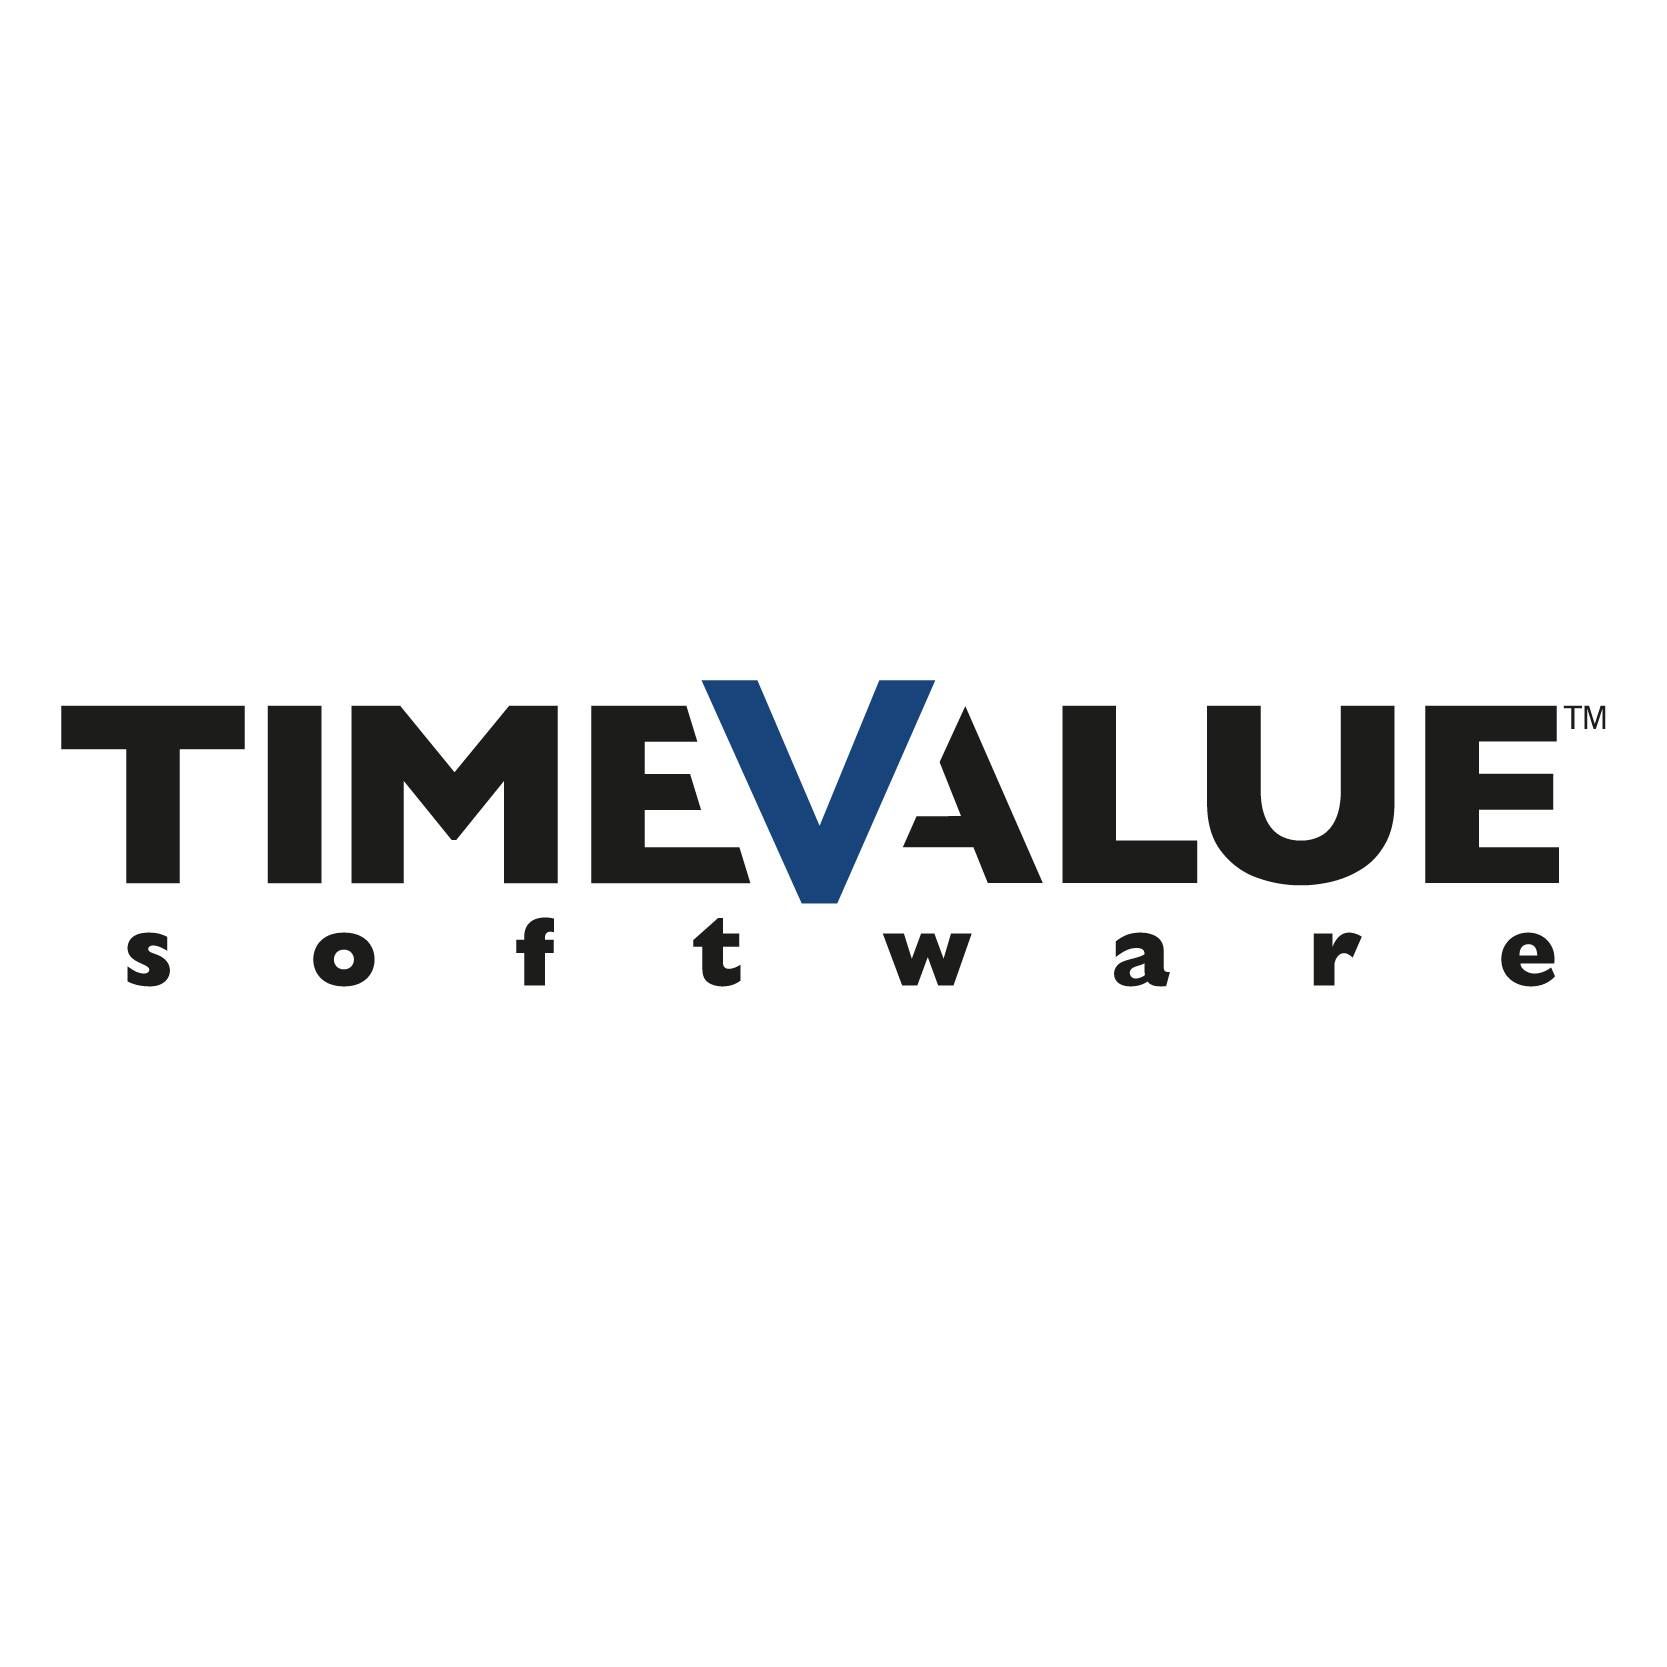 tvalue software download